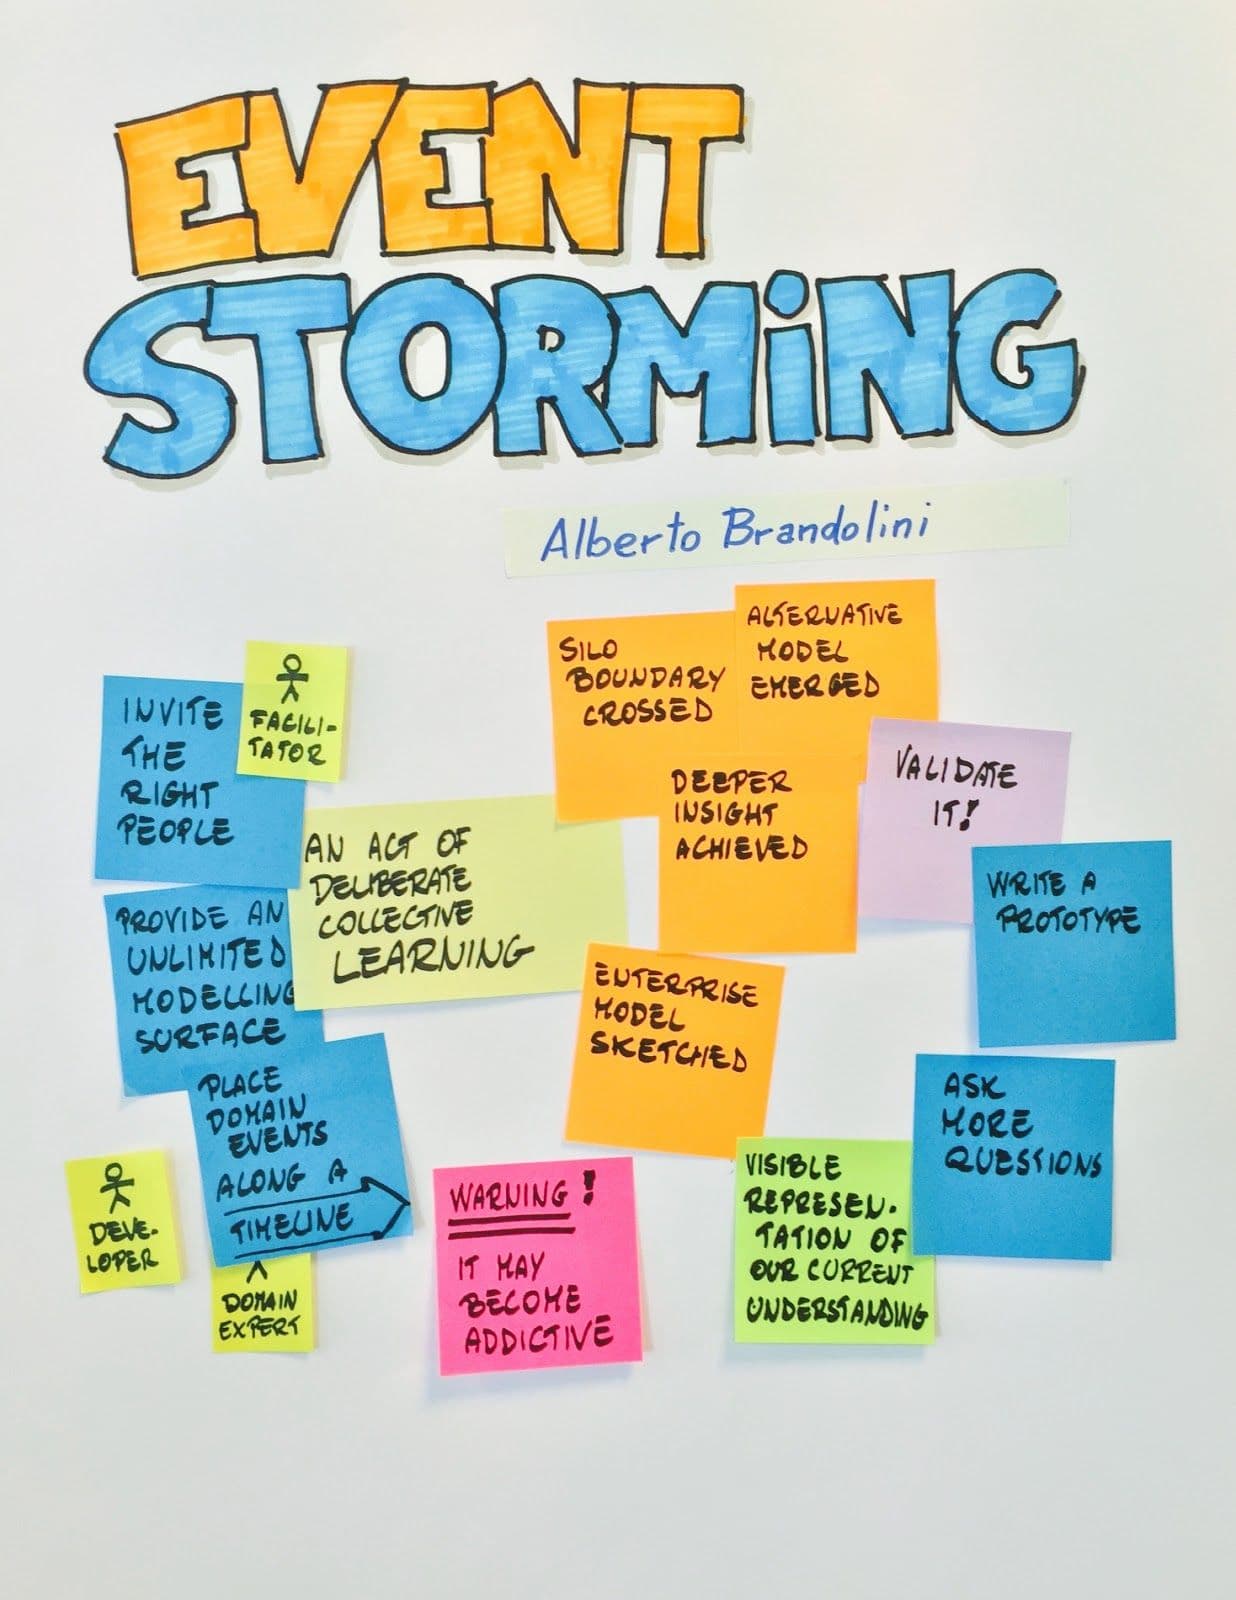 EventStorming - An act of deliberate collective learning